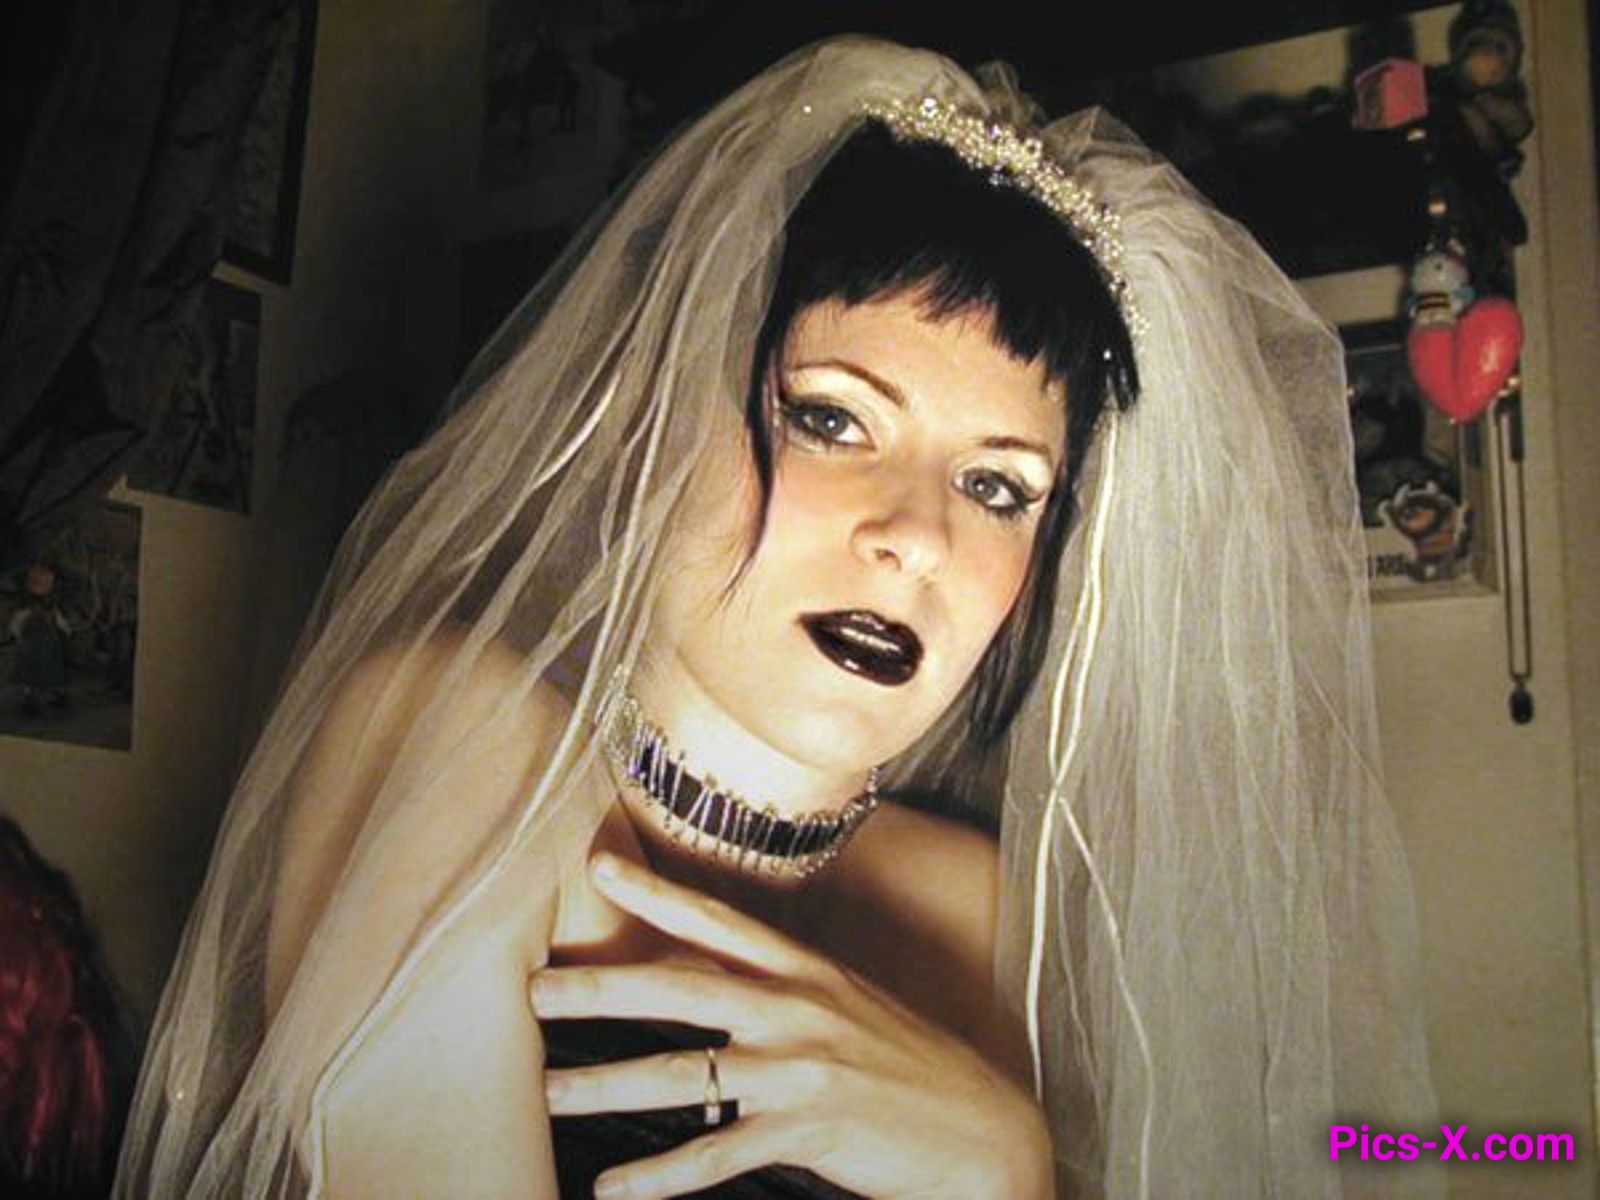 Gothic bride showing off her sexy body in some arty shots - Punk Rock Girlfriend - Image 1